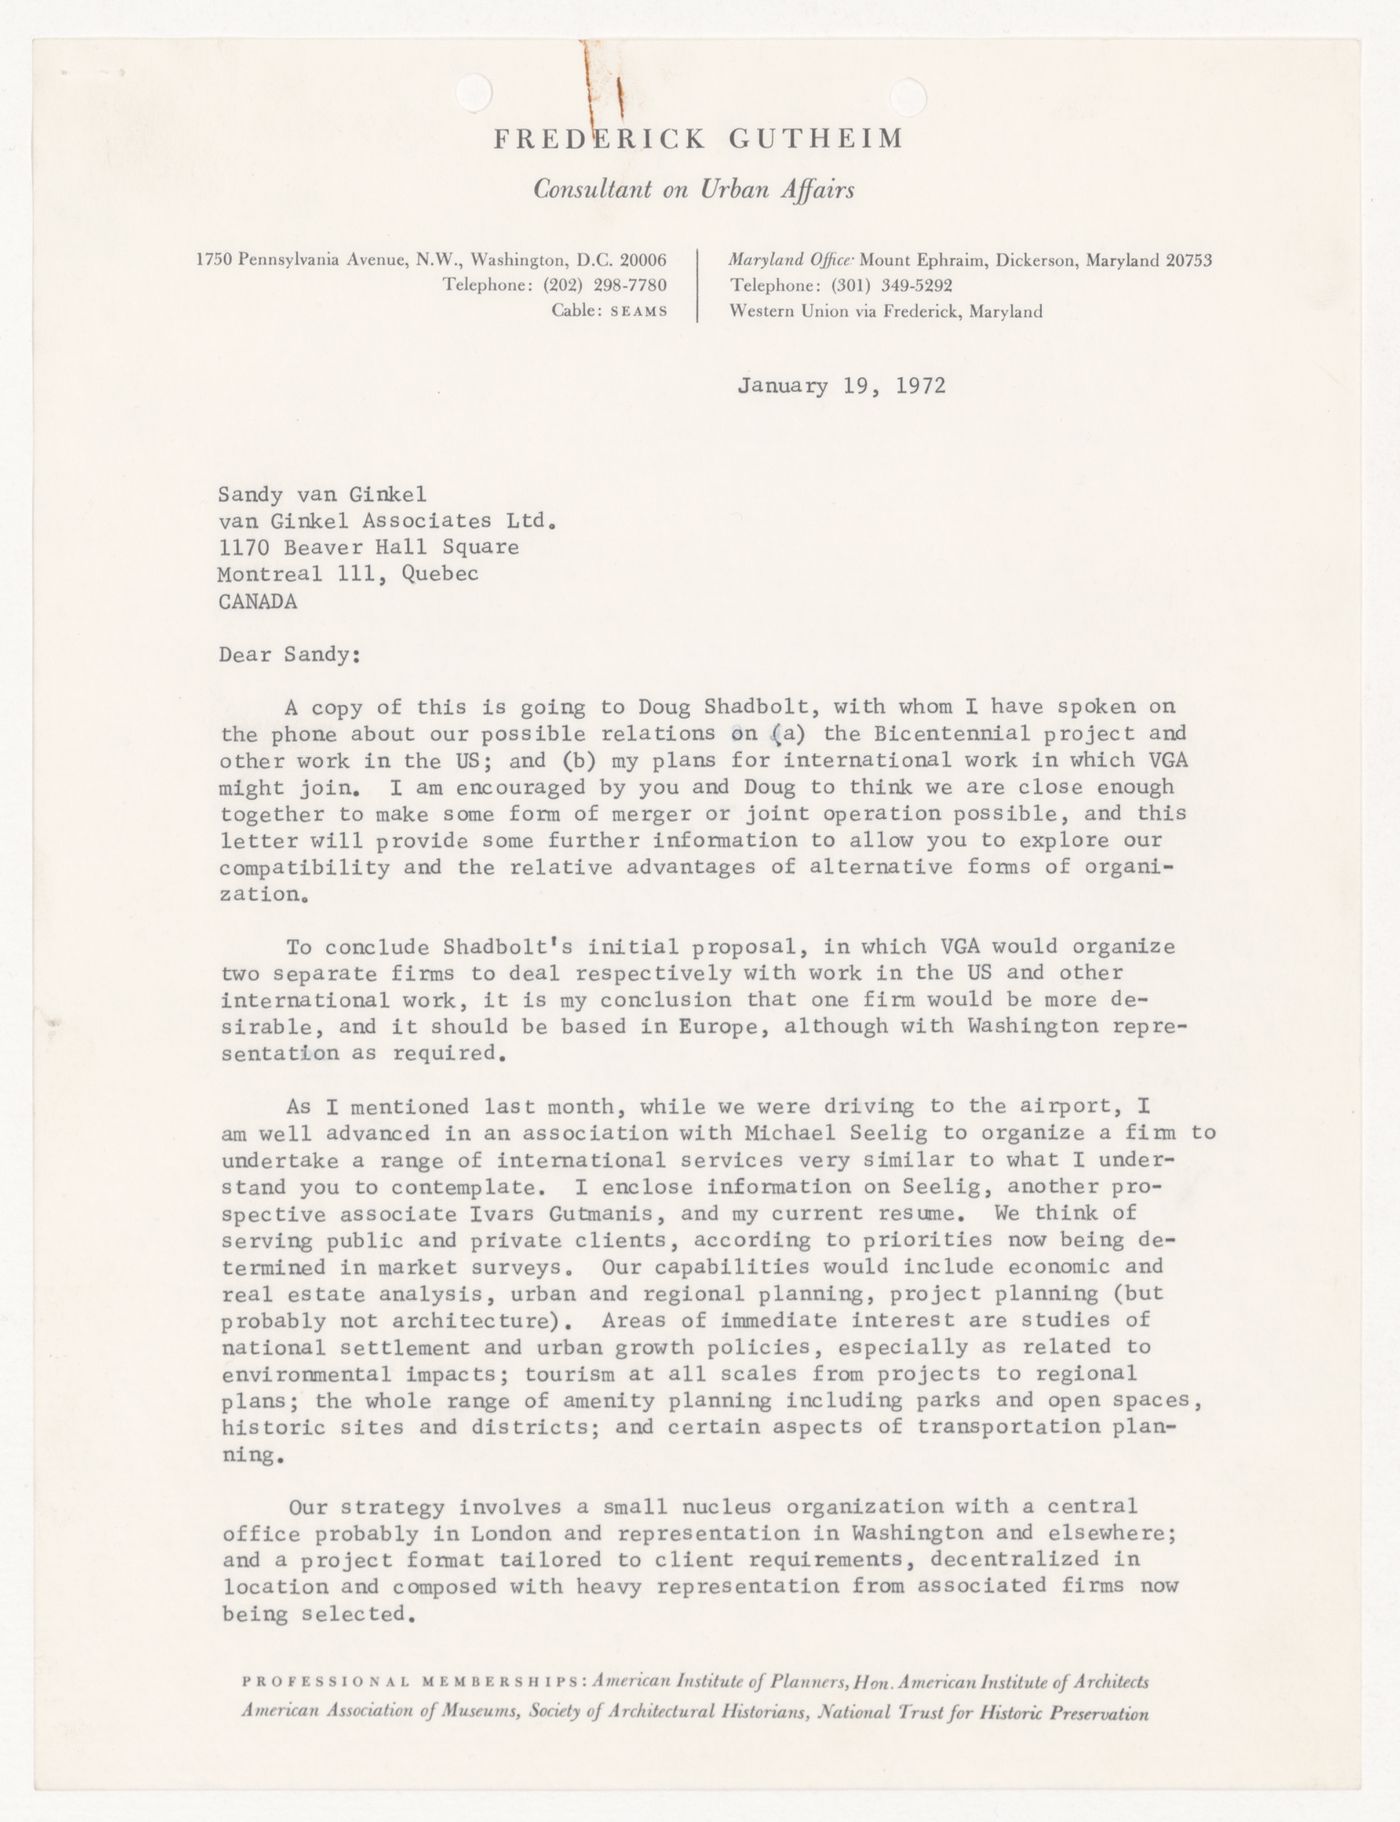 Letter from Frederick Gutheim to H. P. Daniel van Ginkel for United States One (U.S. 1)